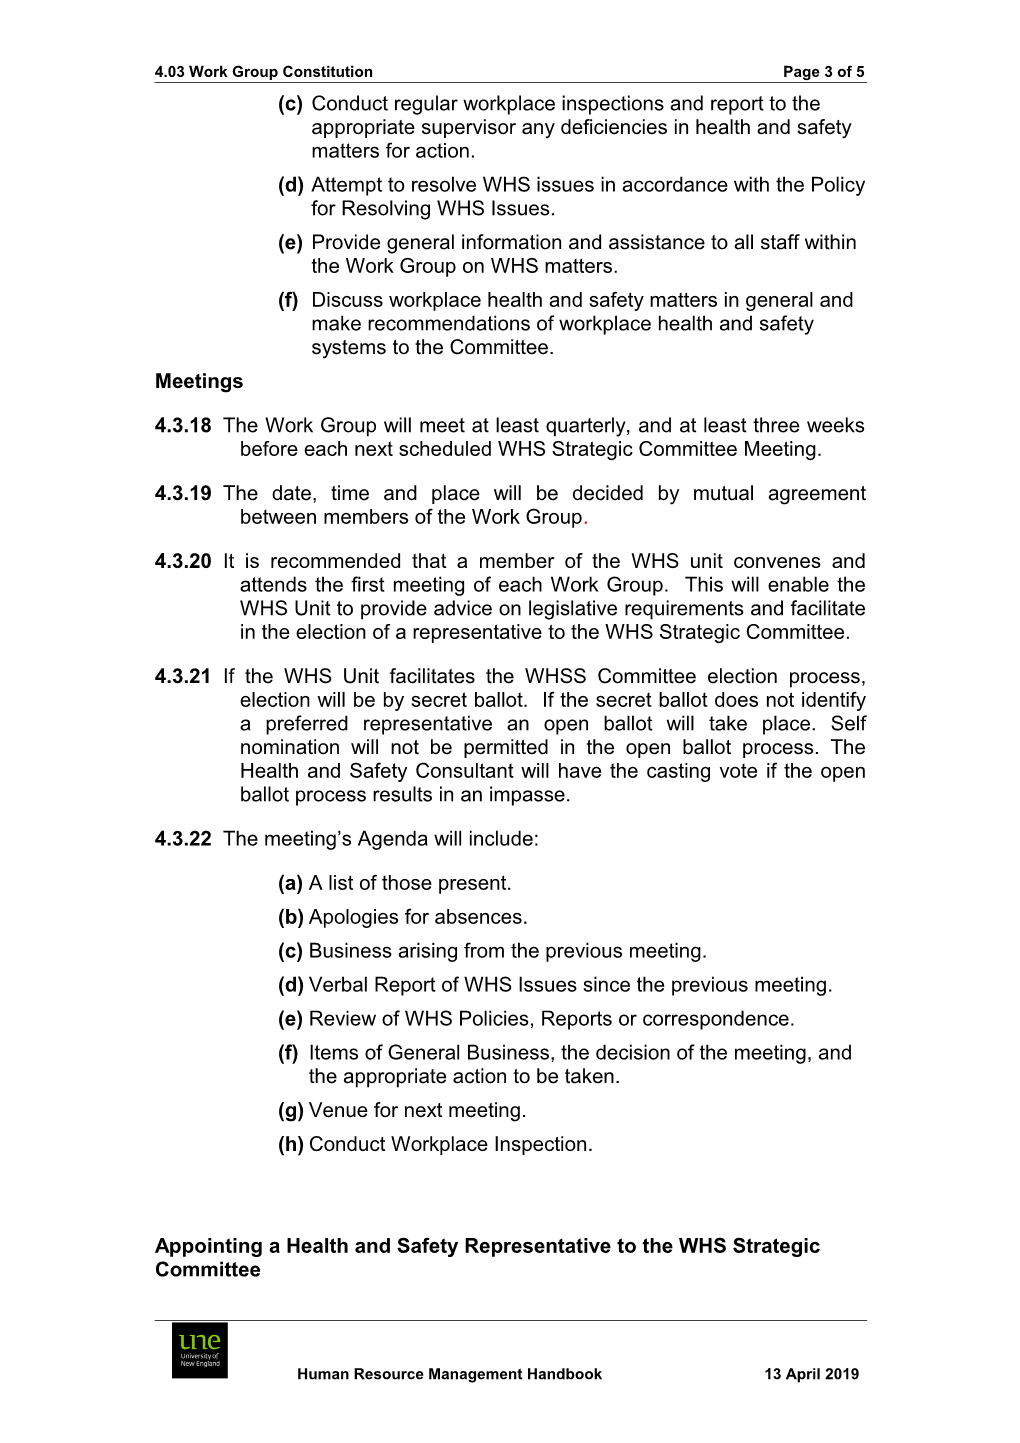 4.03 OH&S Working Group Constitution